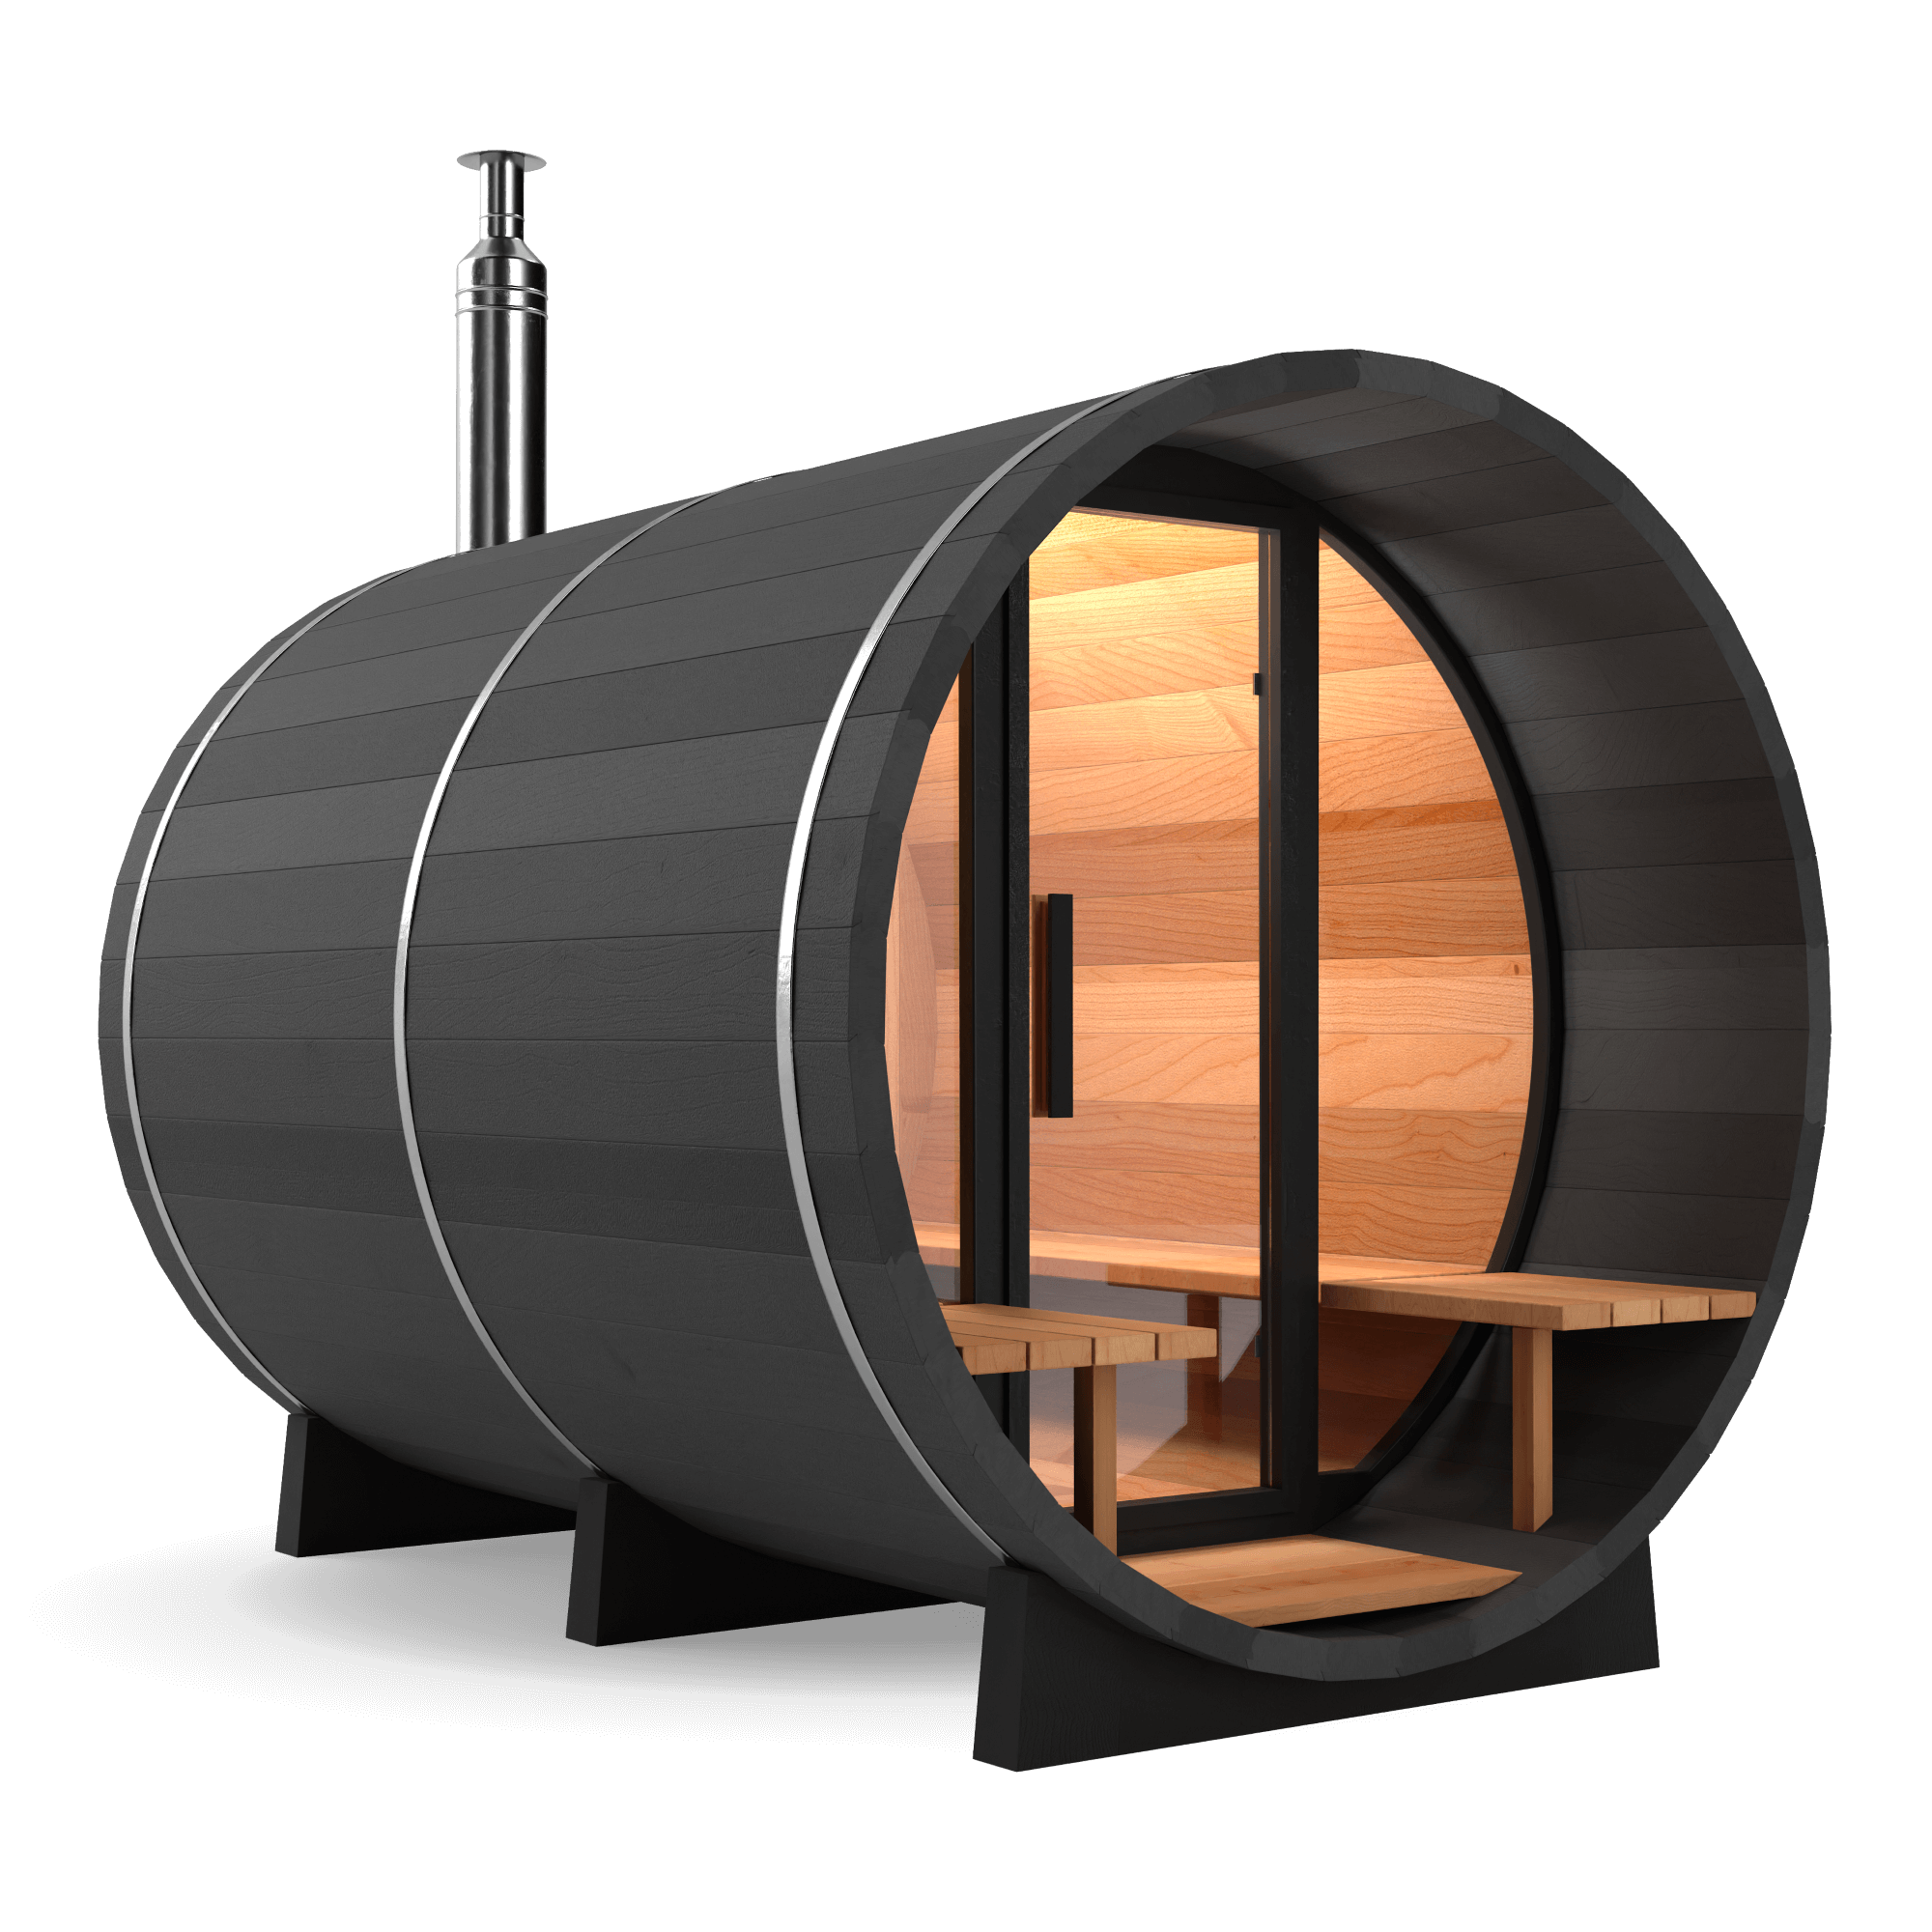 Luxury black red cedar barrel sauna with harvia m3 wood fired stove and porch 